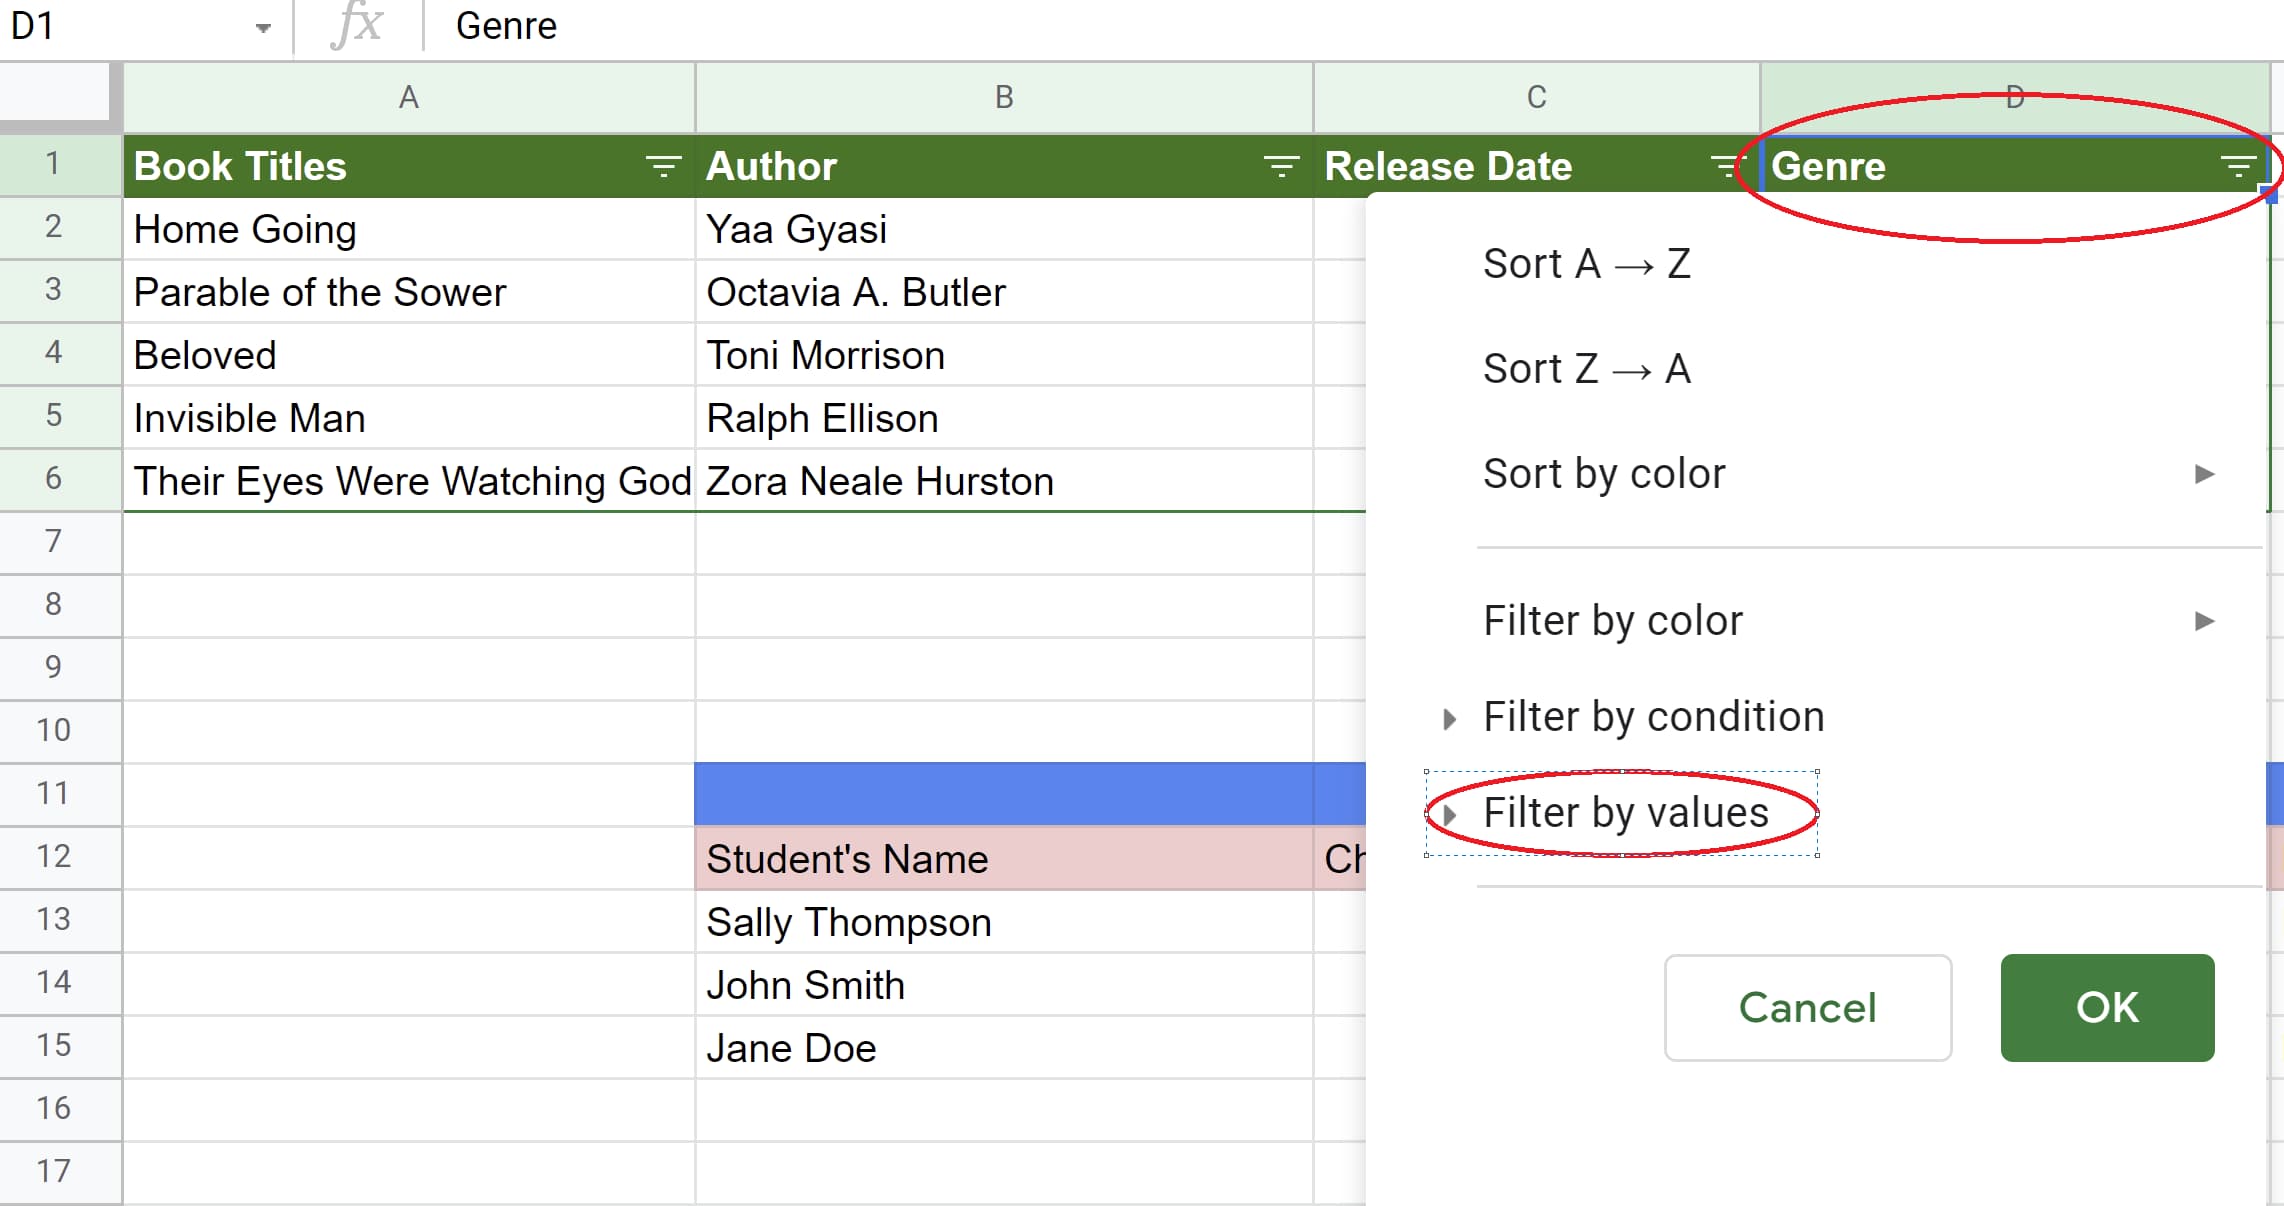 Open the filter icon in the Genre column and select the Filter by value tab in Google Sheets